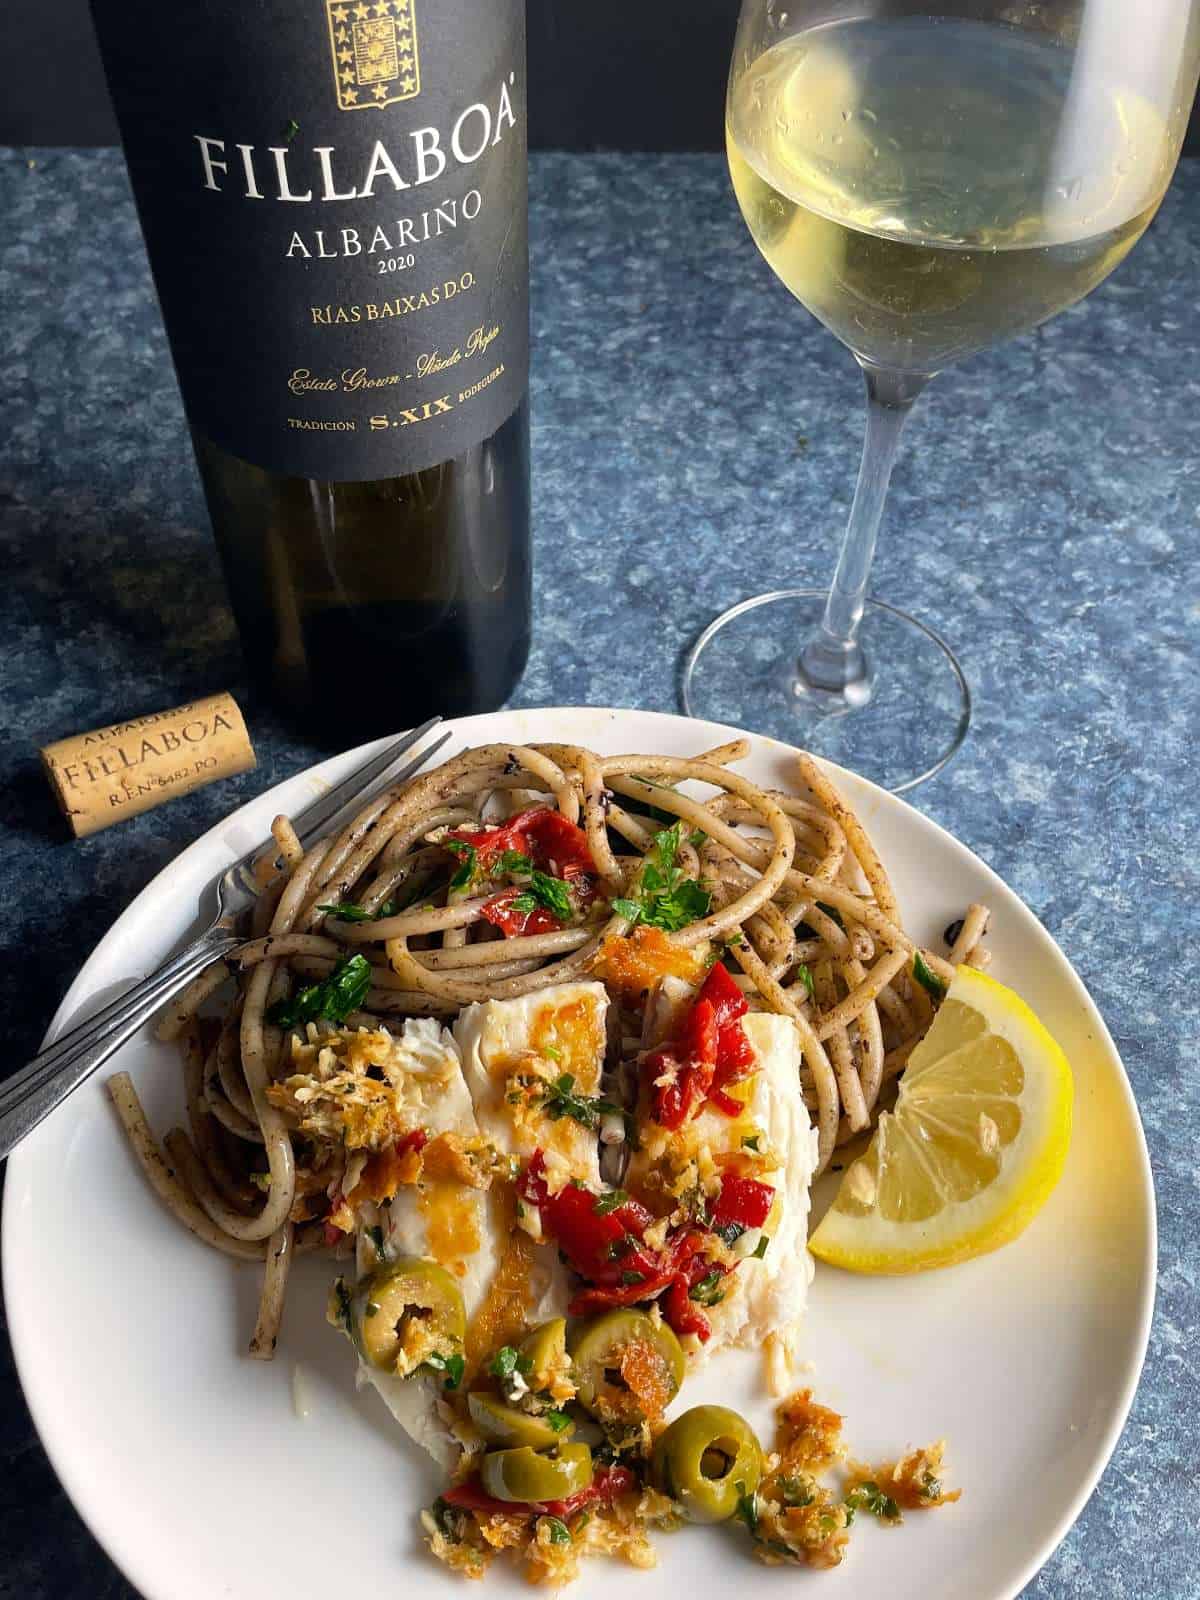 sea bass plated with pasta, served with a white wine.